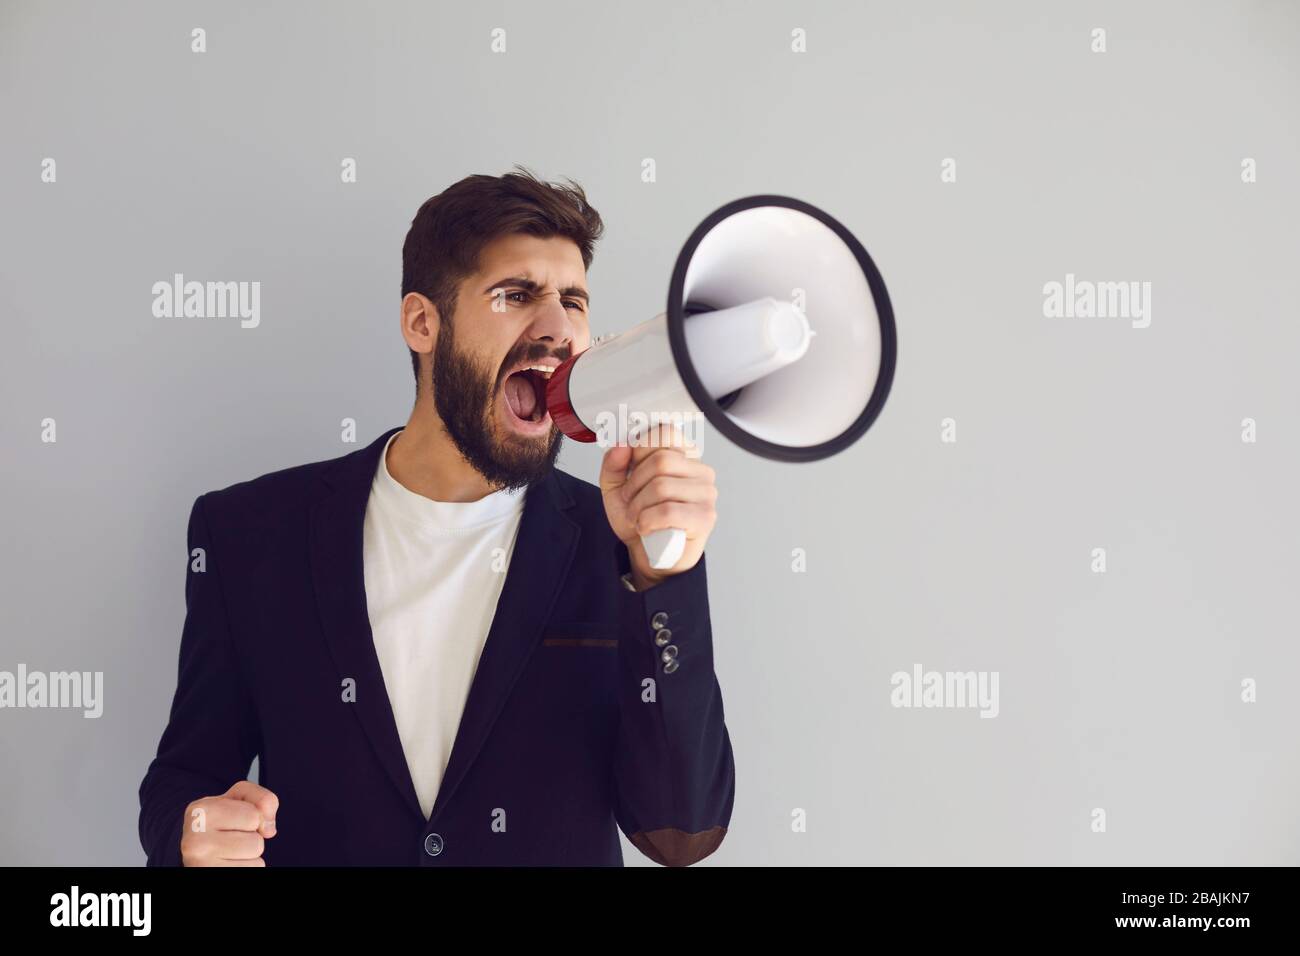 Man with a loudspeaker shouts announces news protest on a gray background. Stock Photo